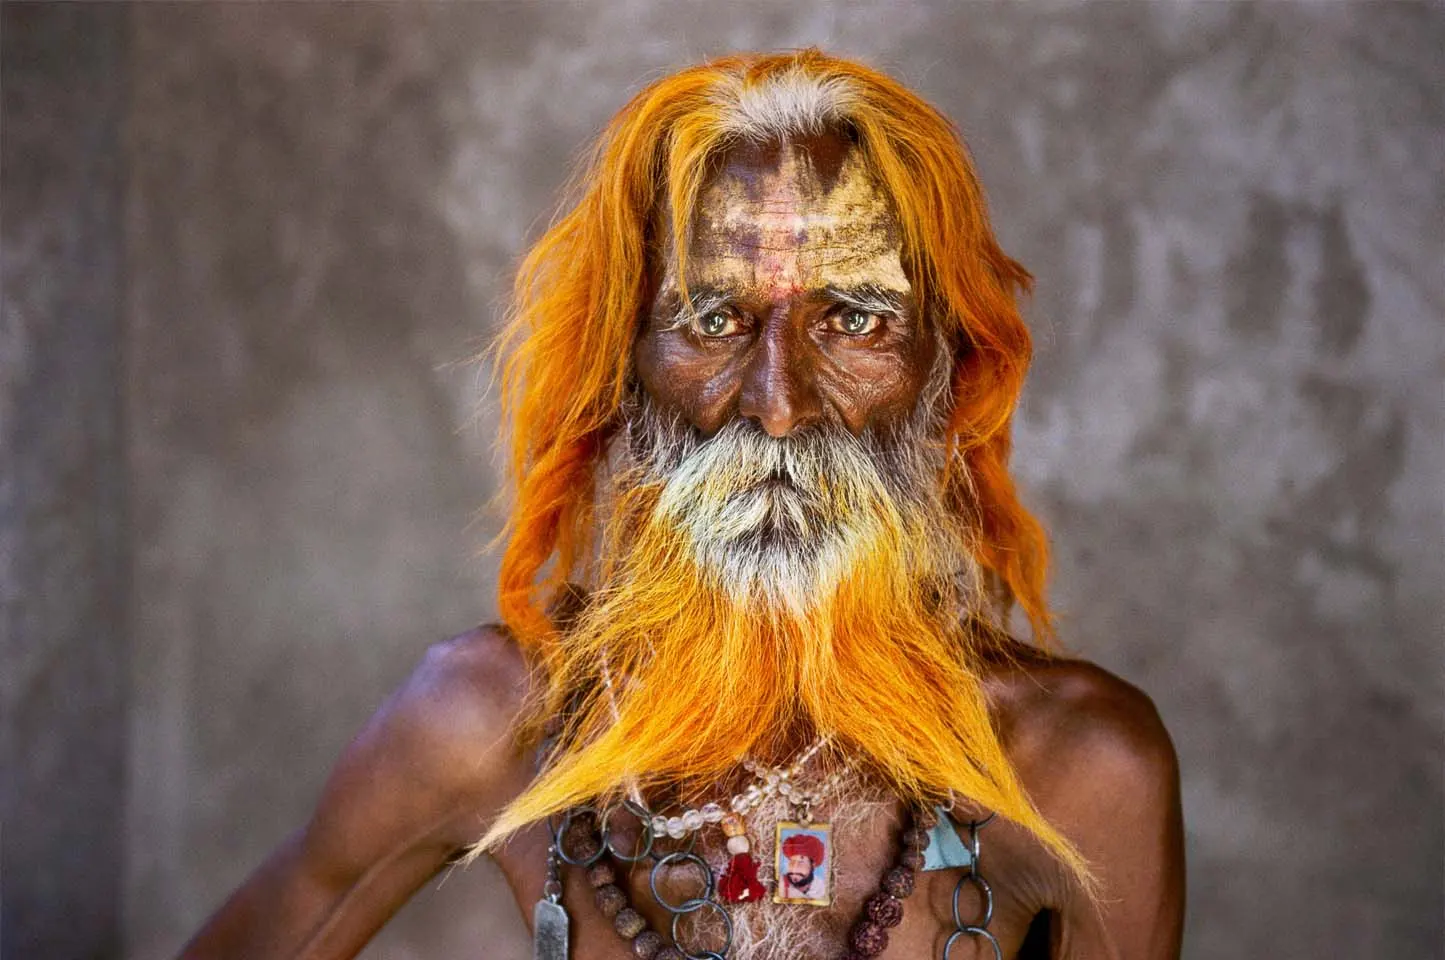 Award-winning Photographer - Steve McCurry ICONS in Sydney: A Photography Exhibit